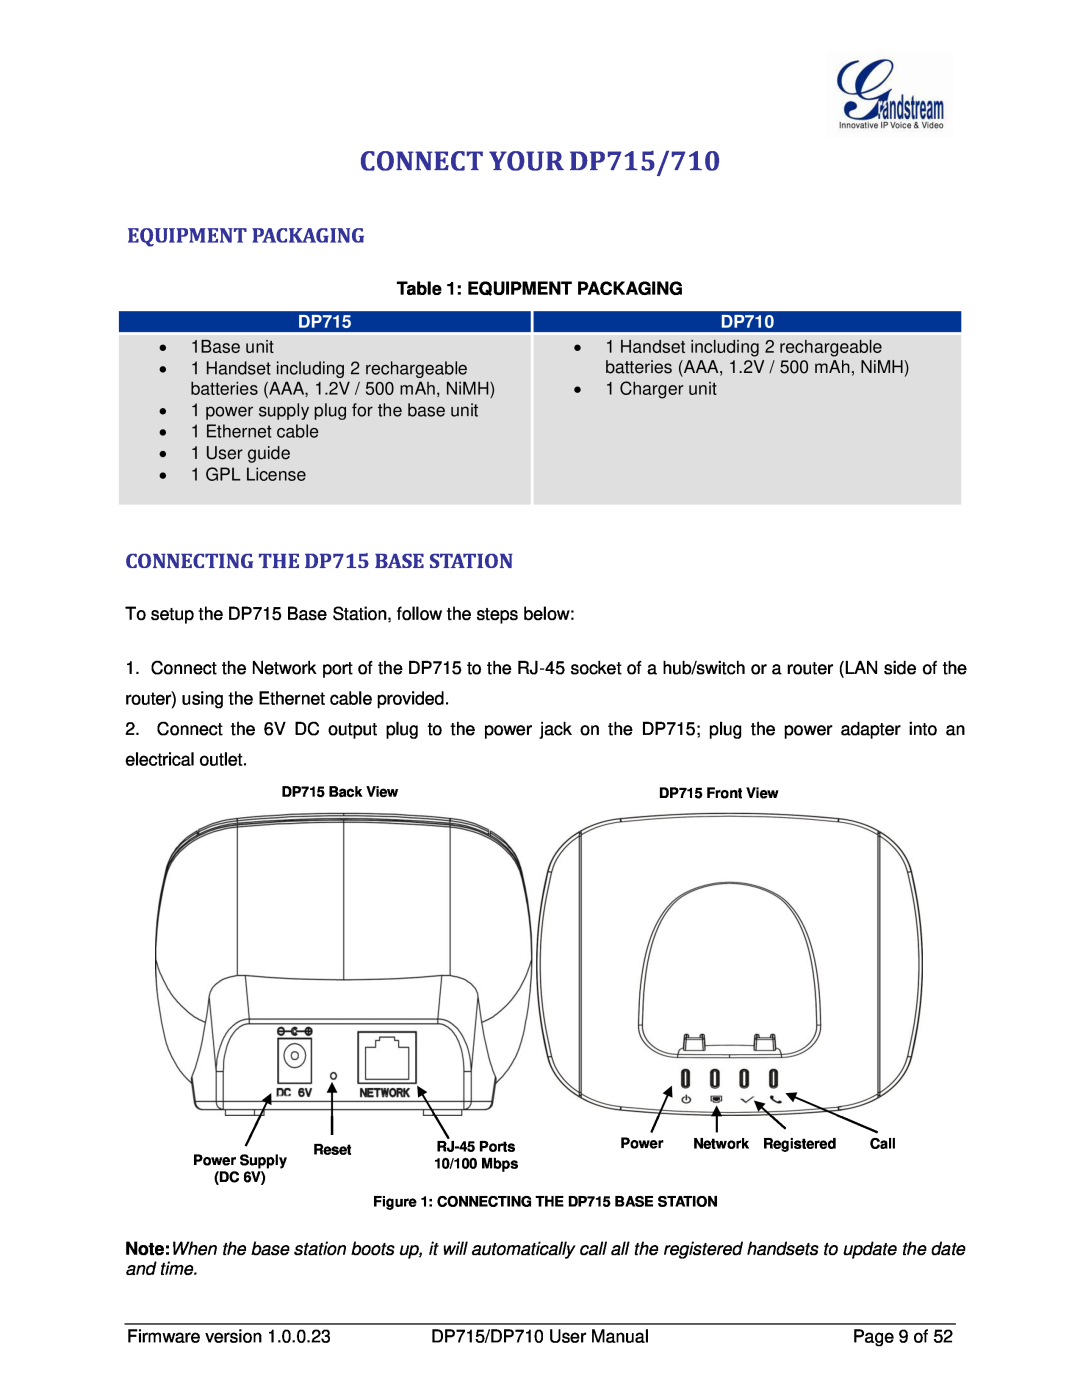 Grandstream Networks DP710 manual CONNECT YOUR DP715/710, Equipment Packaging, CONNECTING THE DP715 BASE STATION 